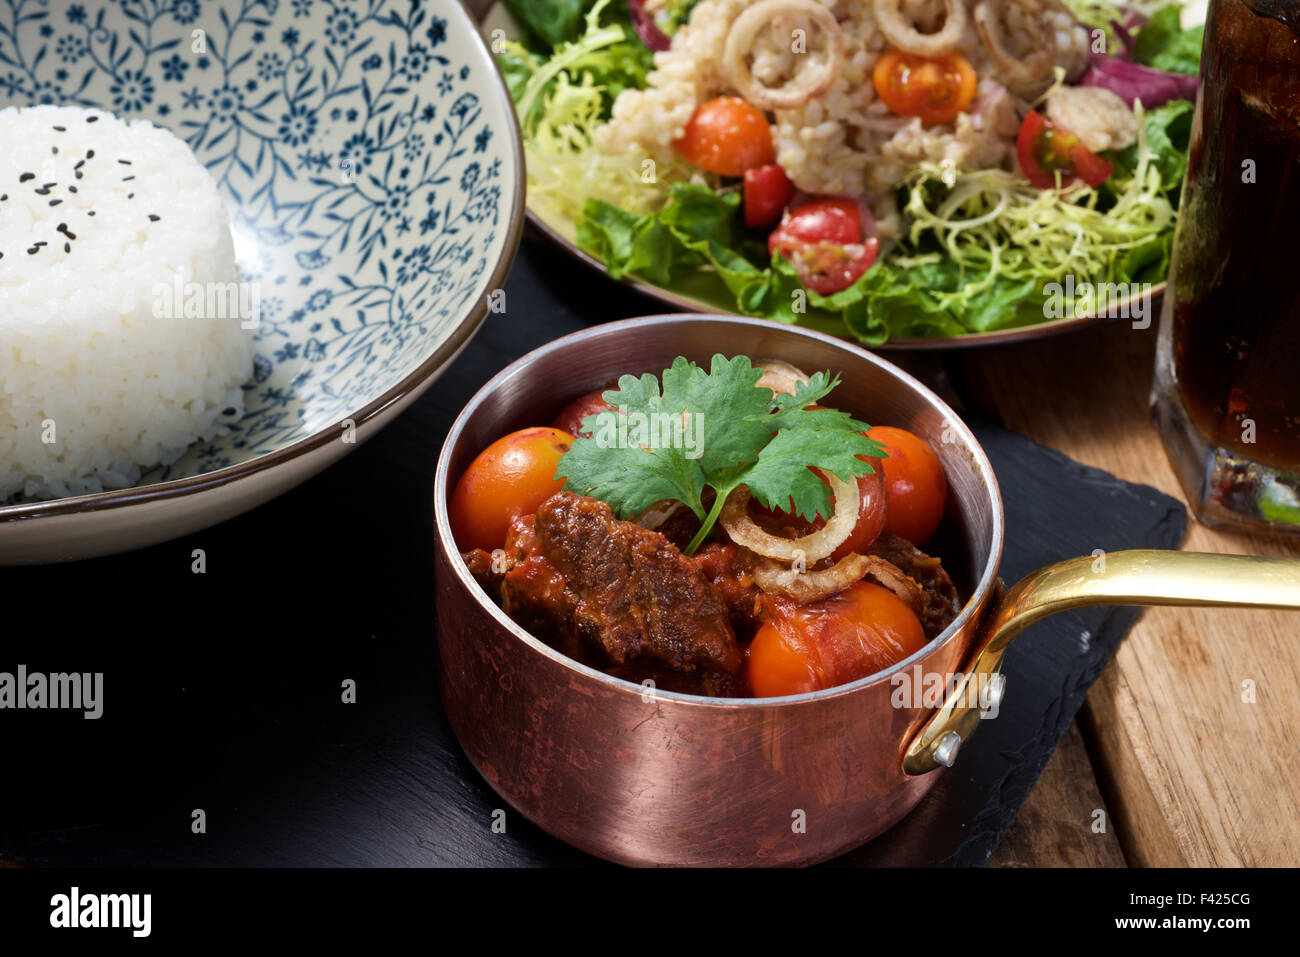 Delicious Beef stew set dish on wooden table Stock Photo